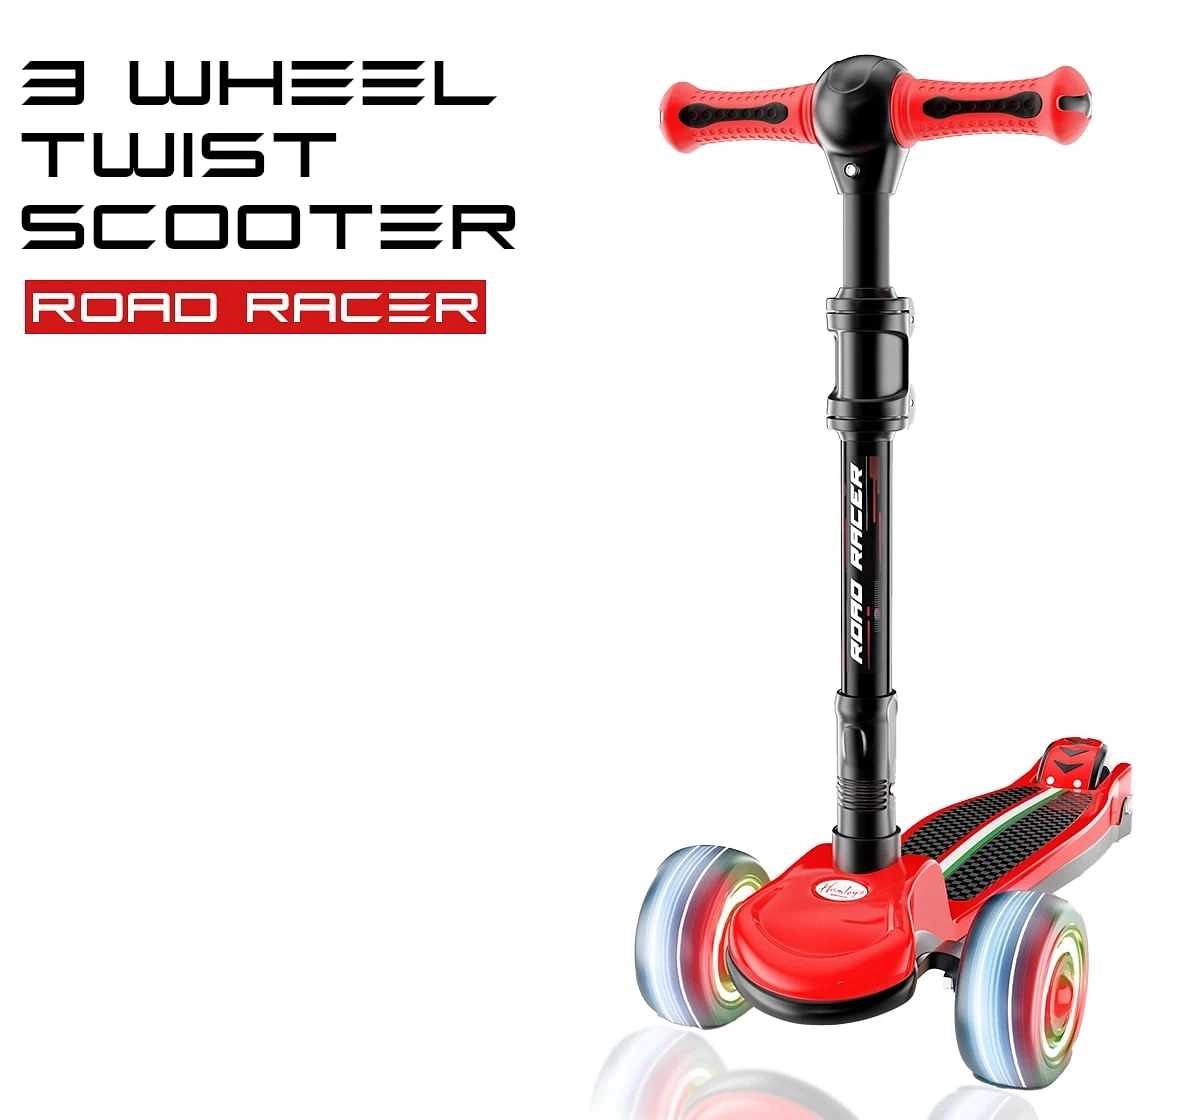 Zoozi 3-Wheel Twist Scooter for Outdoor Play - Red, 3Y+